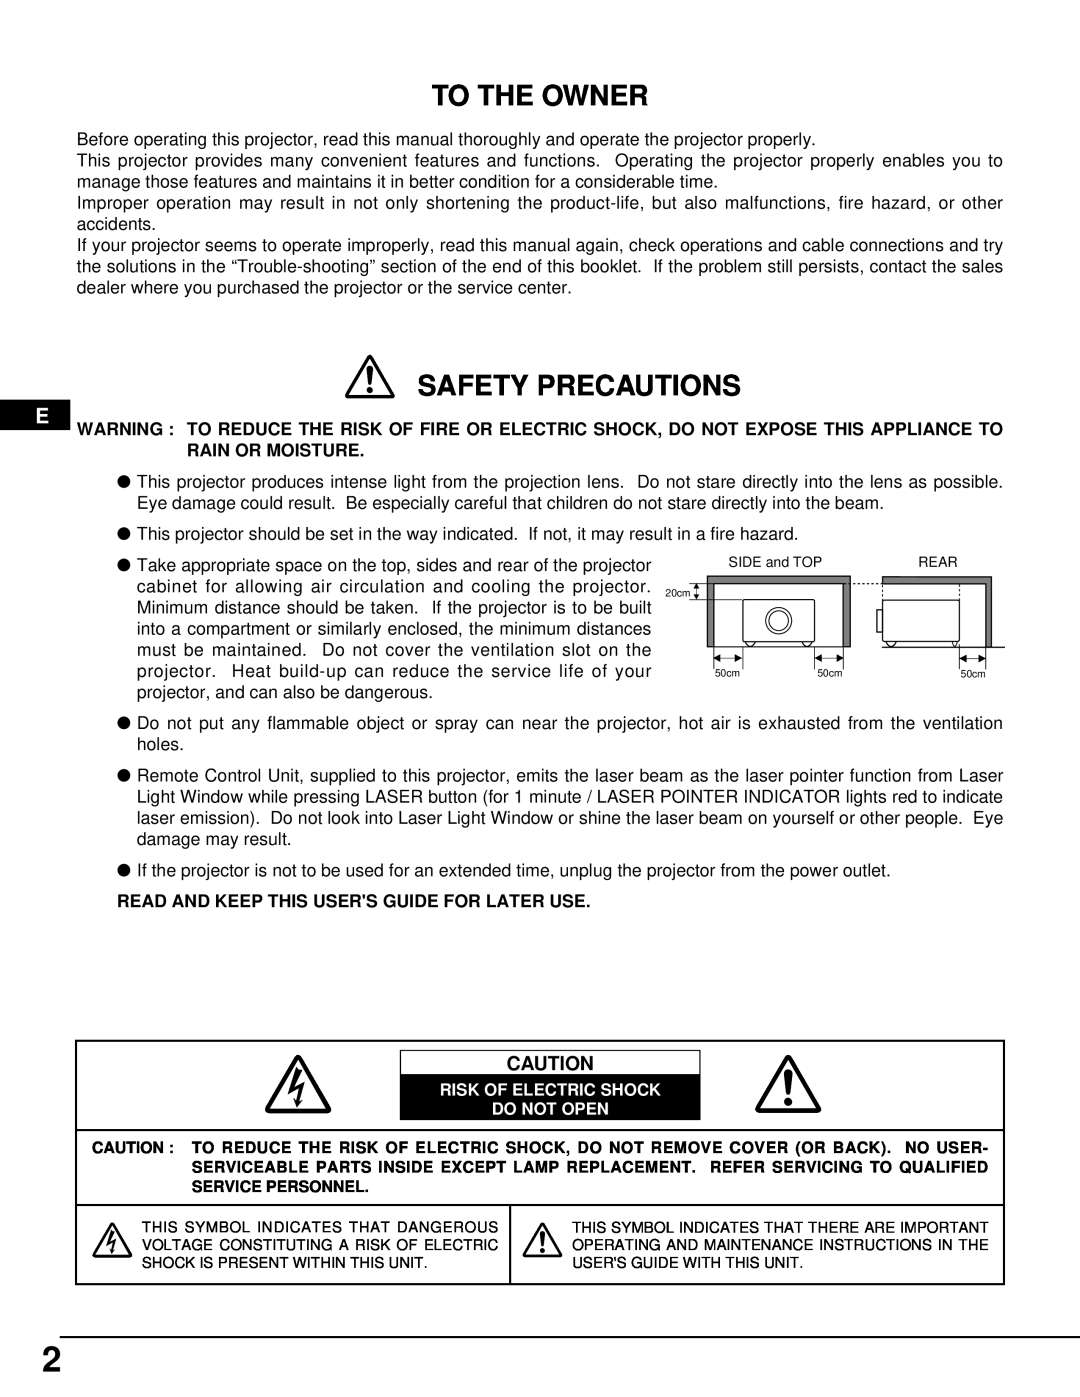 InFocus DP9295 manual To The Owner, Safety Precautions 